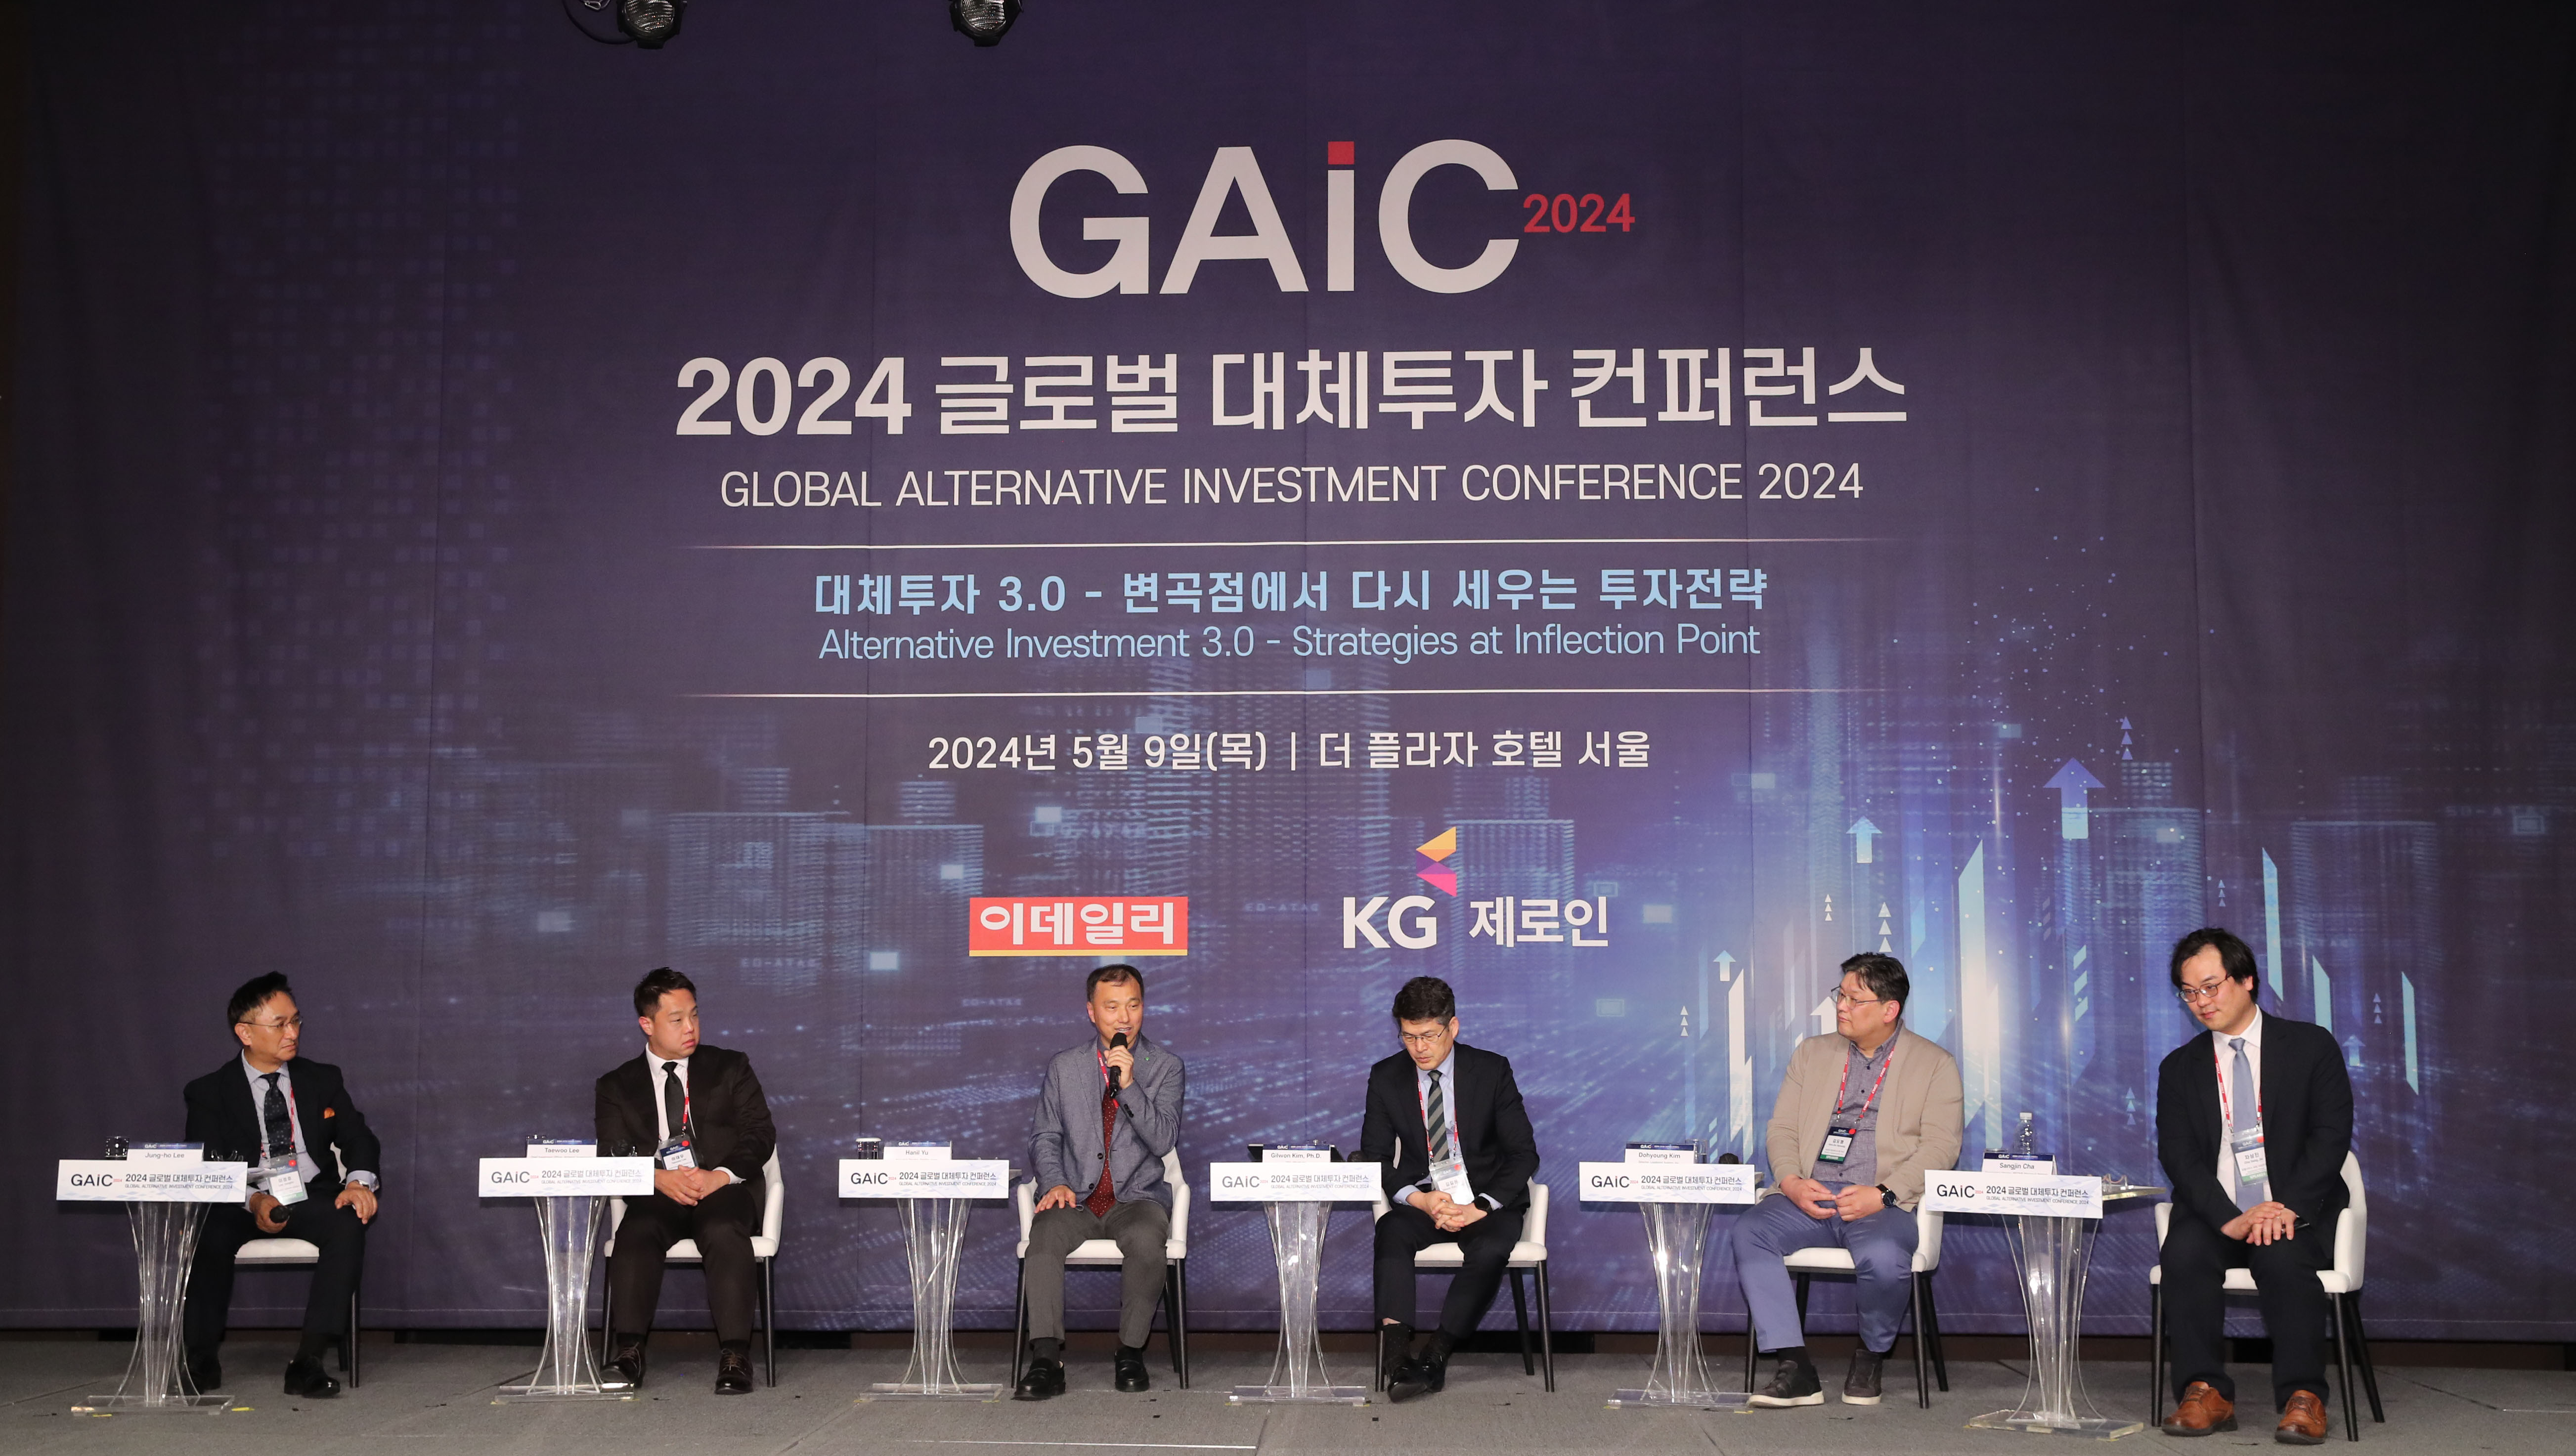 [GAIC2024] “Korea is a Patent Powerhouse, but the IP Investment Market still Needs to be Improved.”